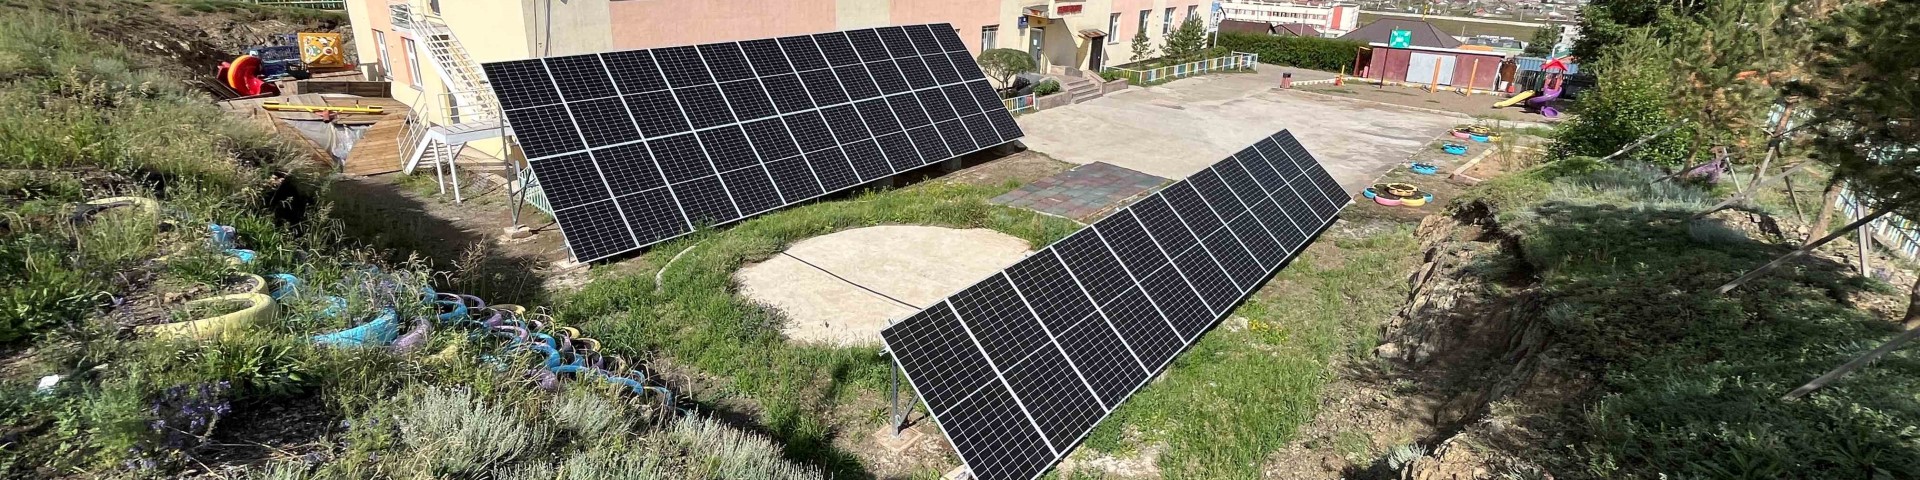 Two photovoltaic solar panels on the lawn in front of a residential building.